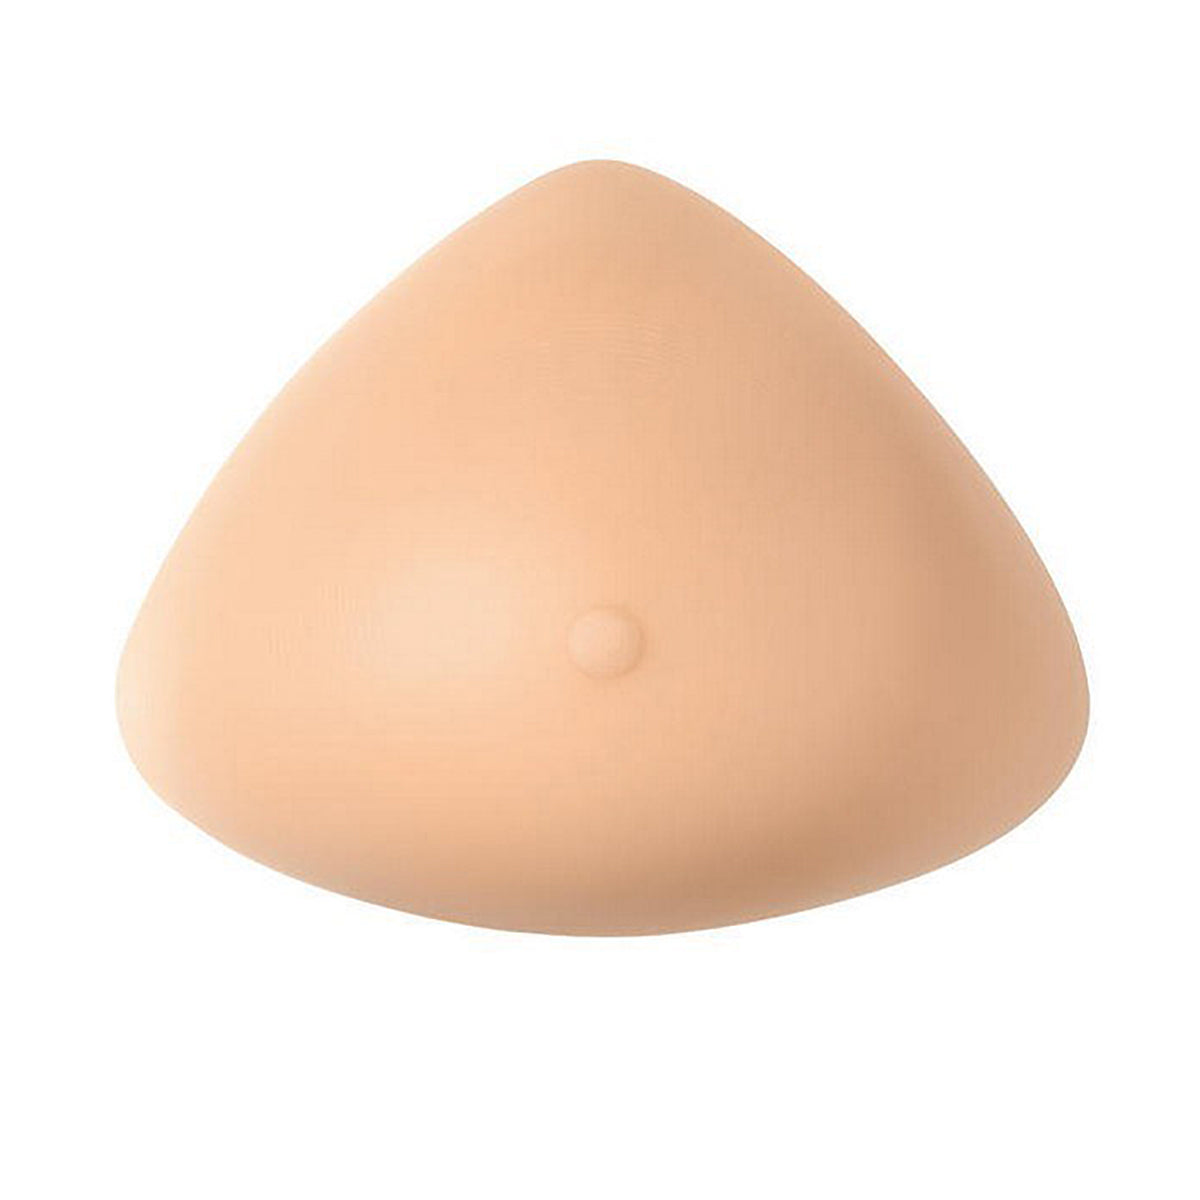 Debut & Review of my G cup Silicone Breastform